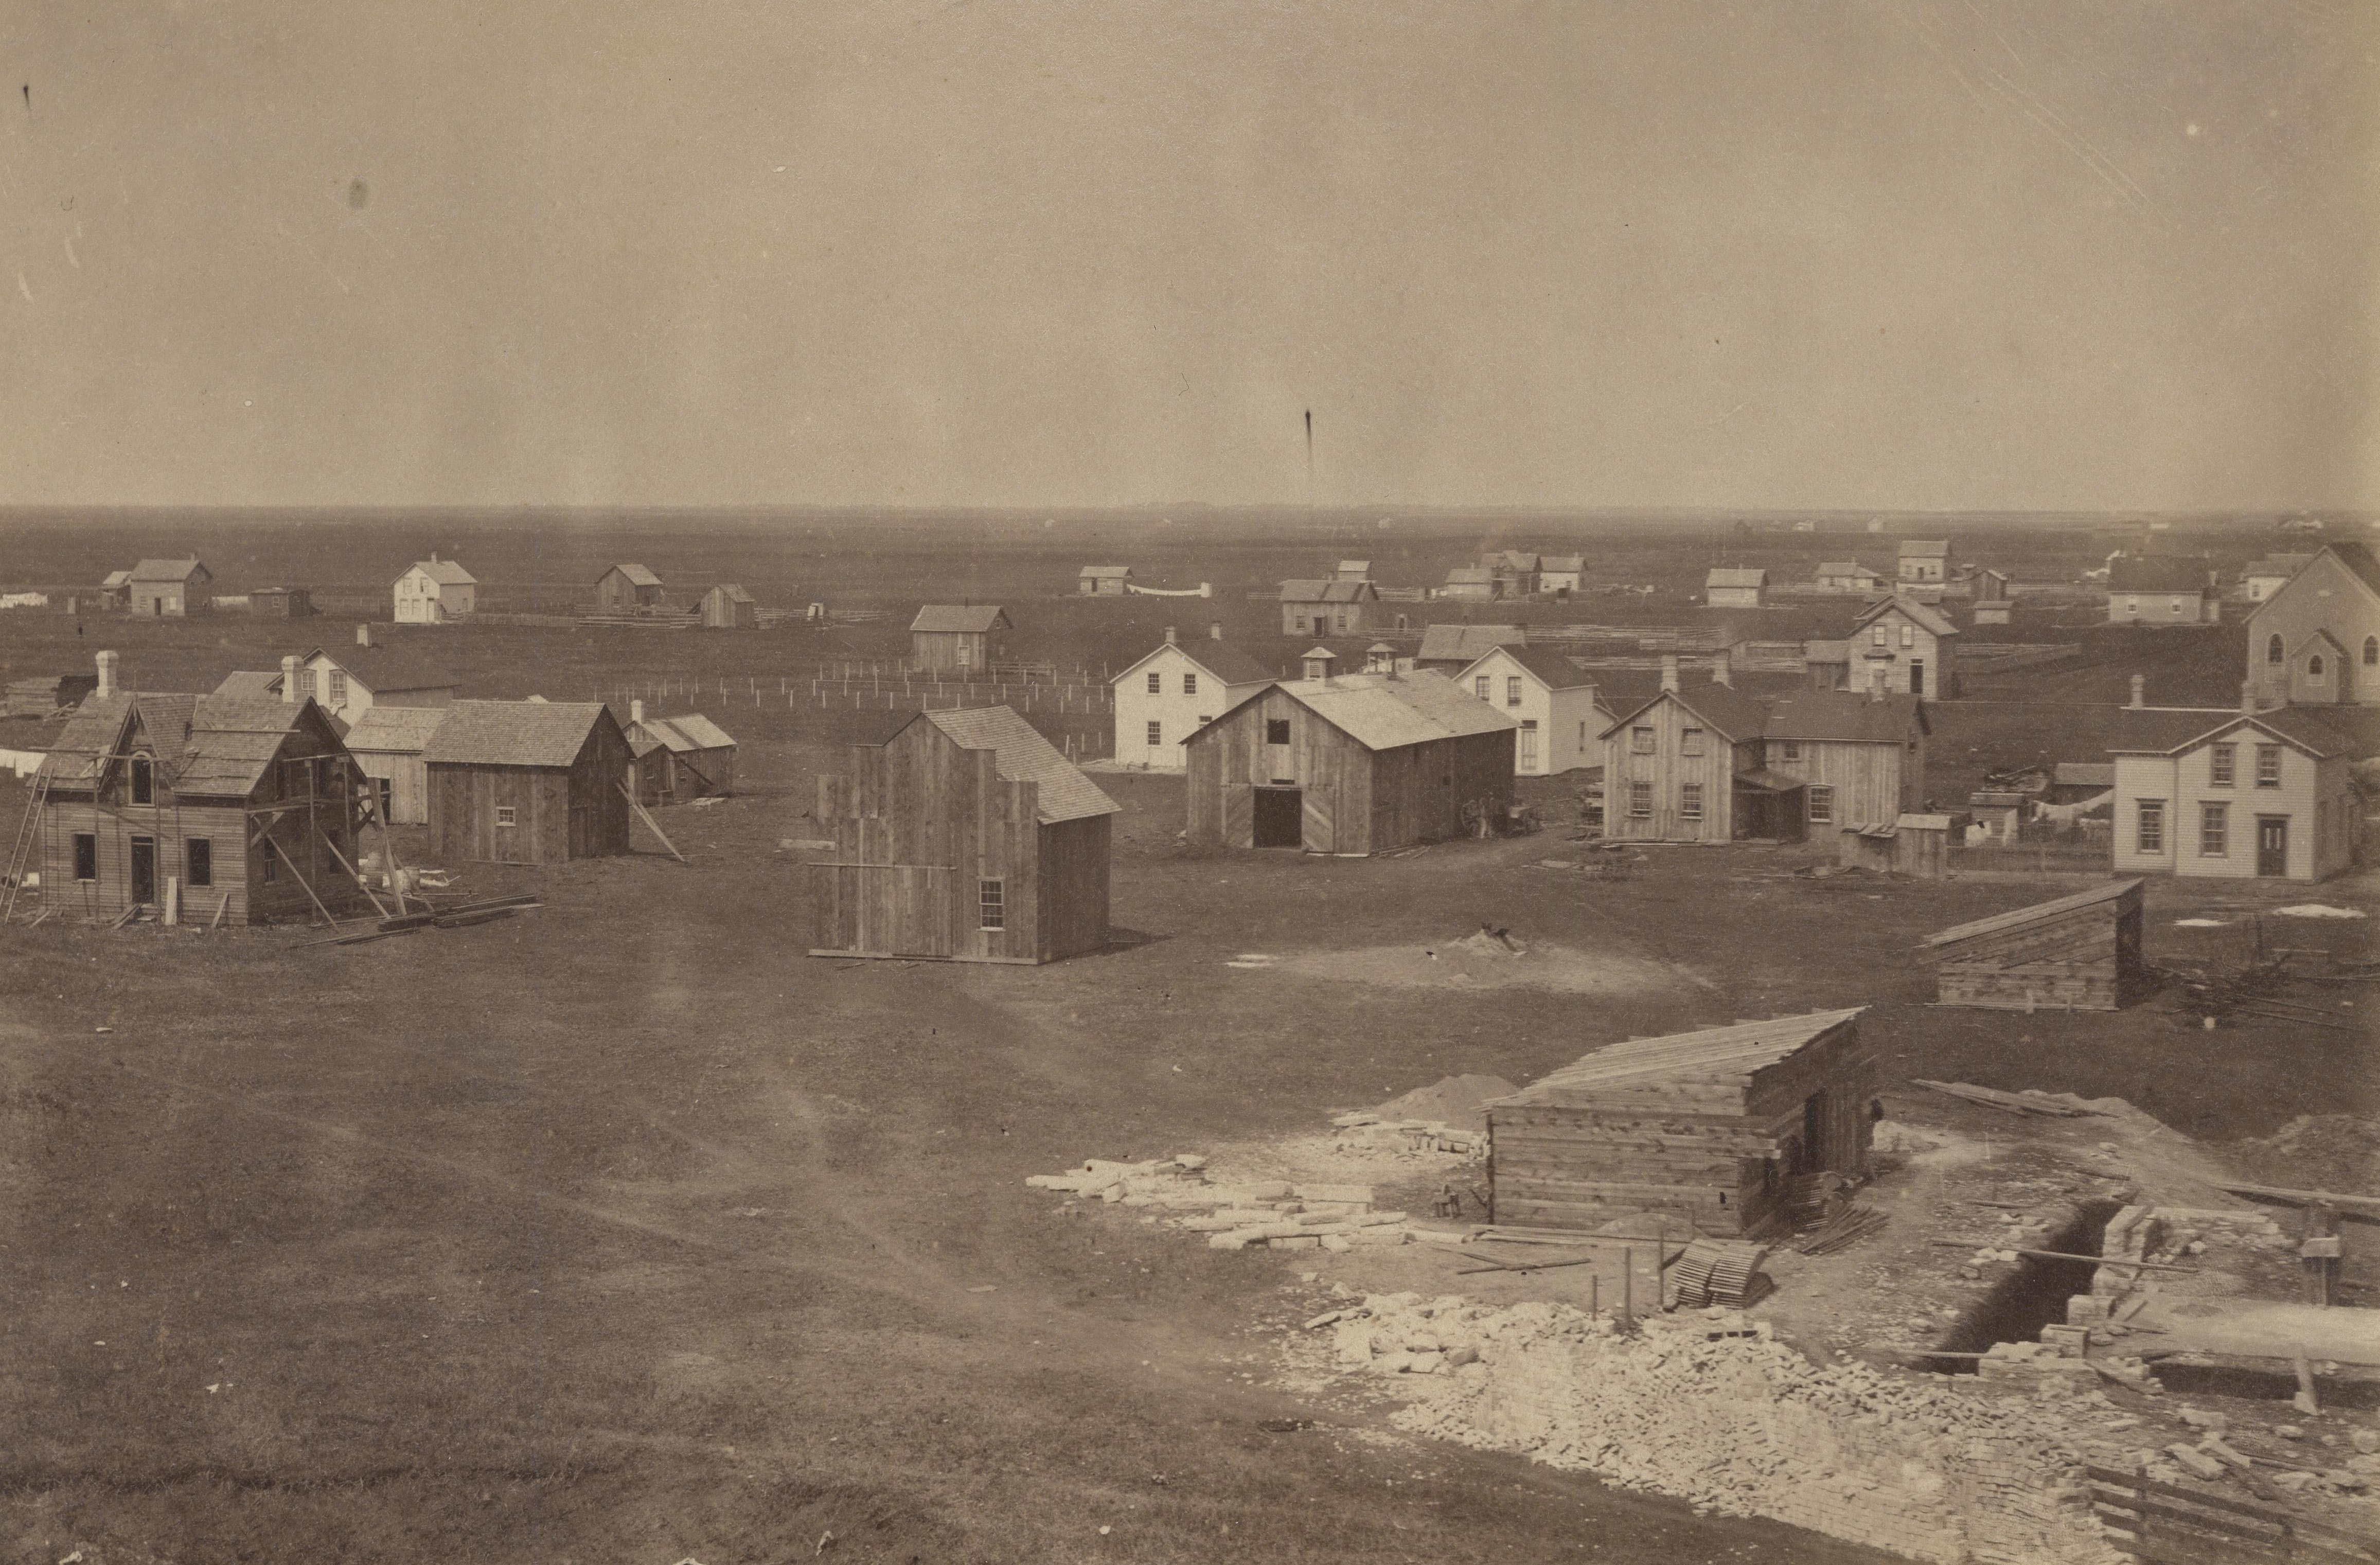 Winnipeg is pictured in an archival photo from 1875.